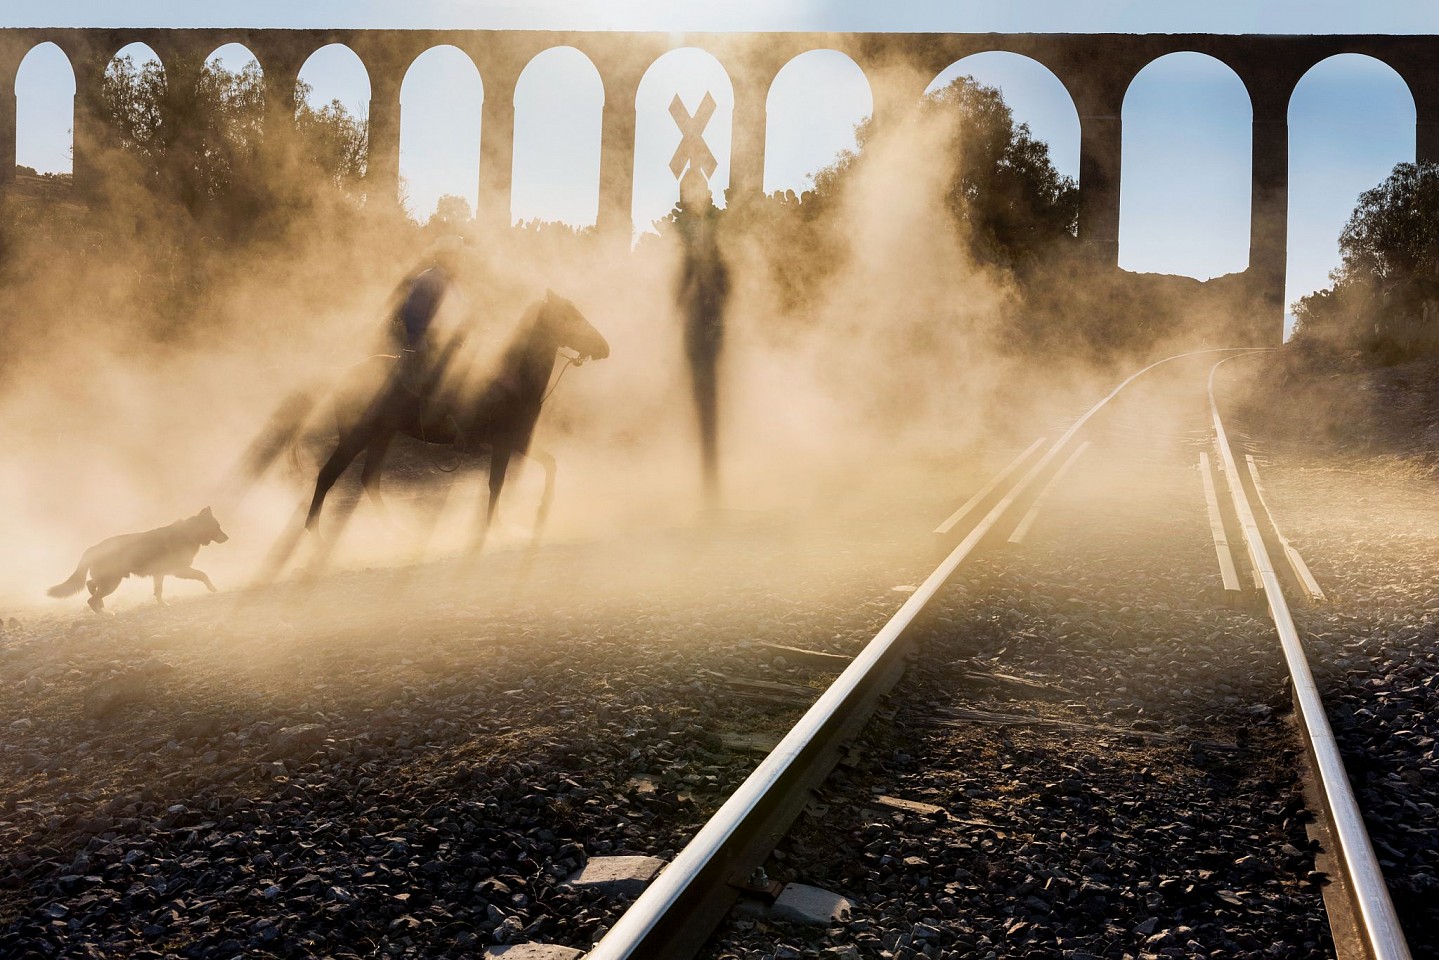 Steve McCurry, Aqueduct of Padre Tembleque, Mexico, 2016
FujiFlex Crystal Archive Print
Price/Size on request